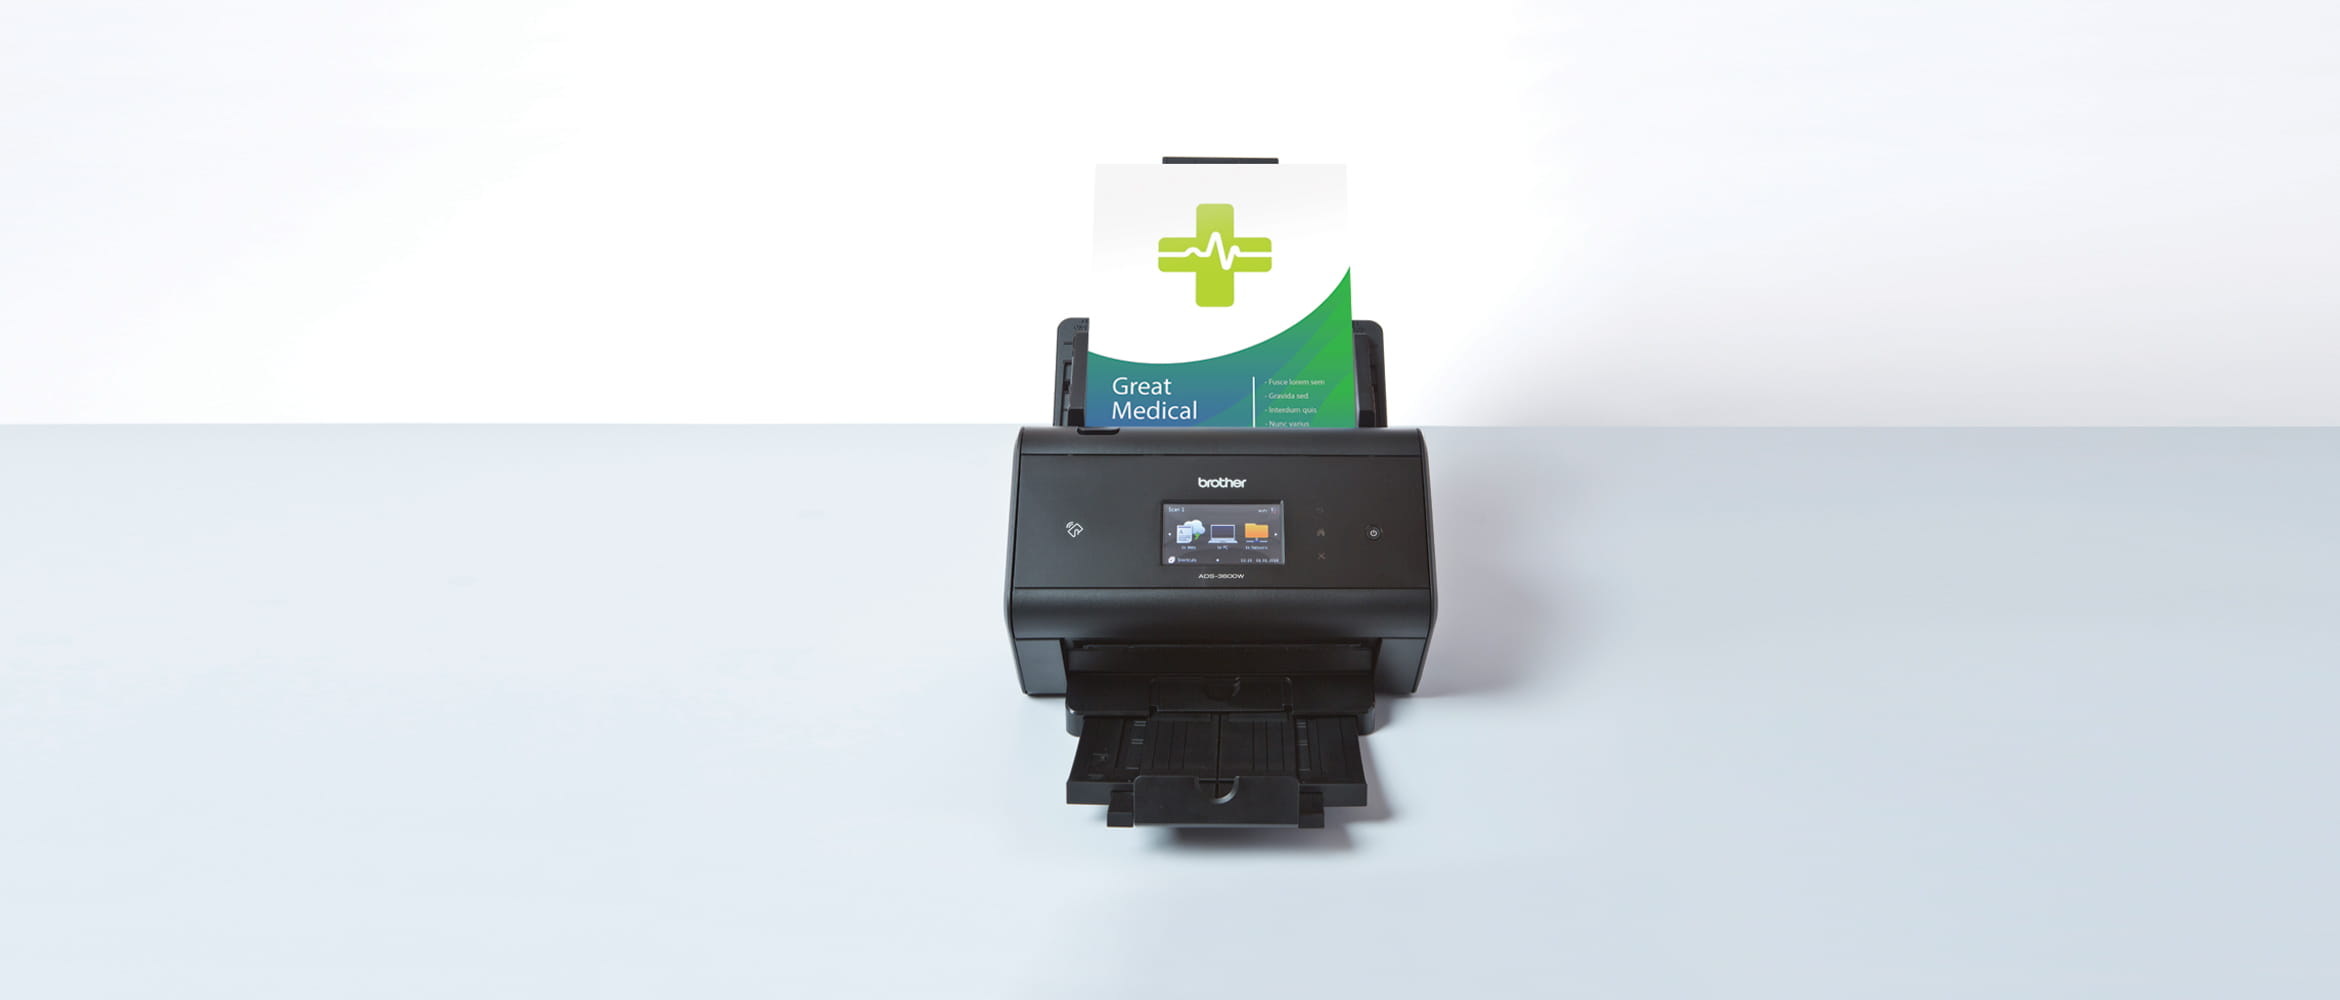 ADS Brother scanner on white background with medical document scanning